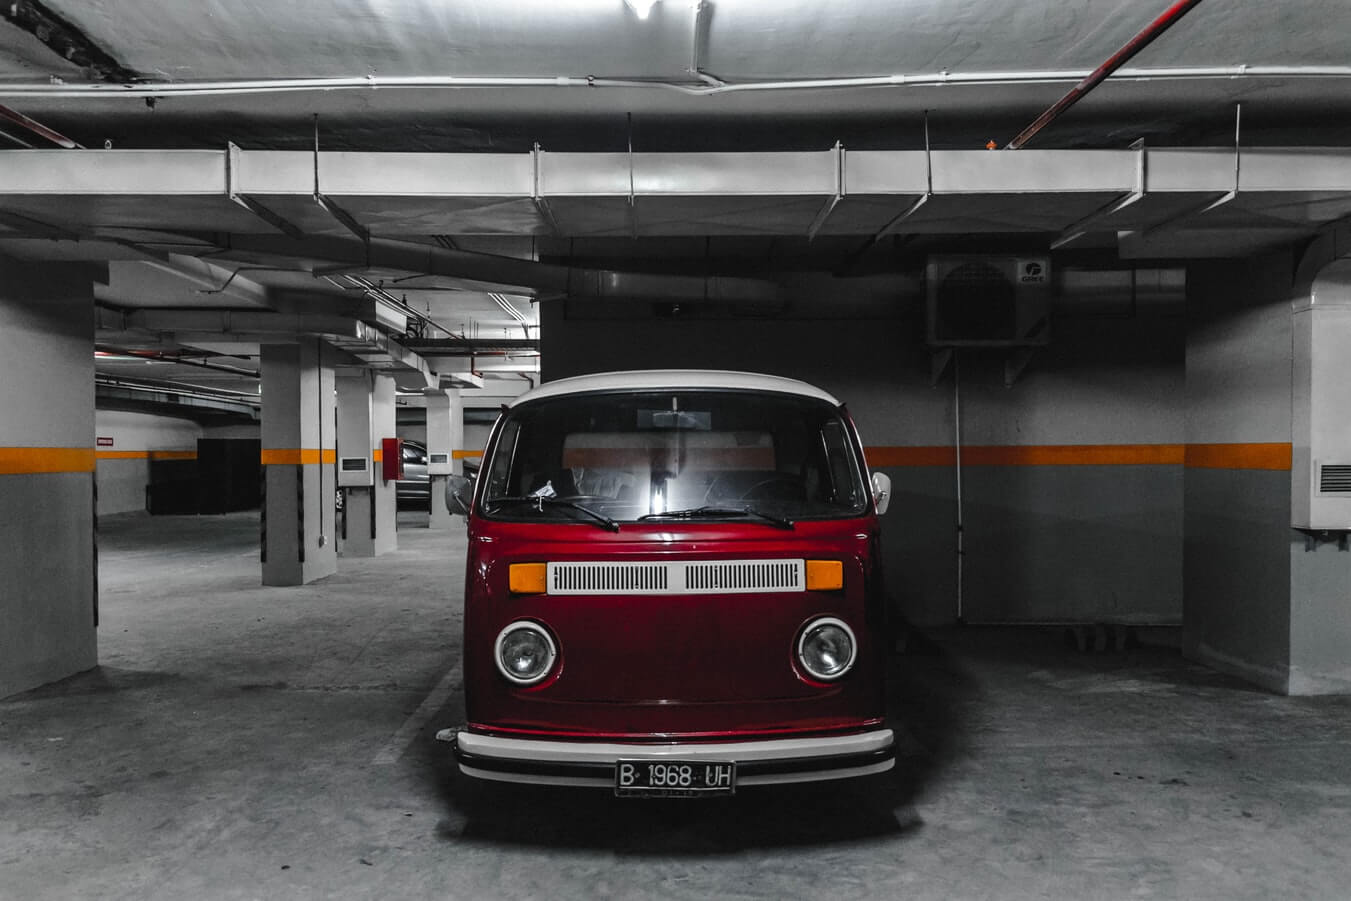 classic vehicle stored in an indoor facility